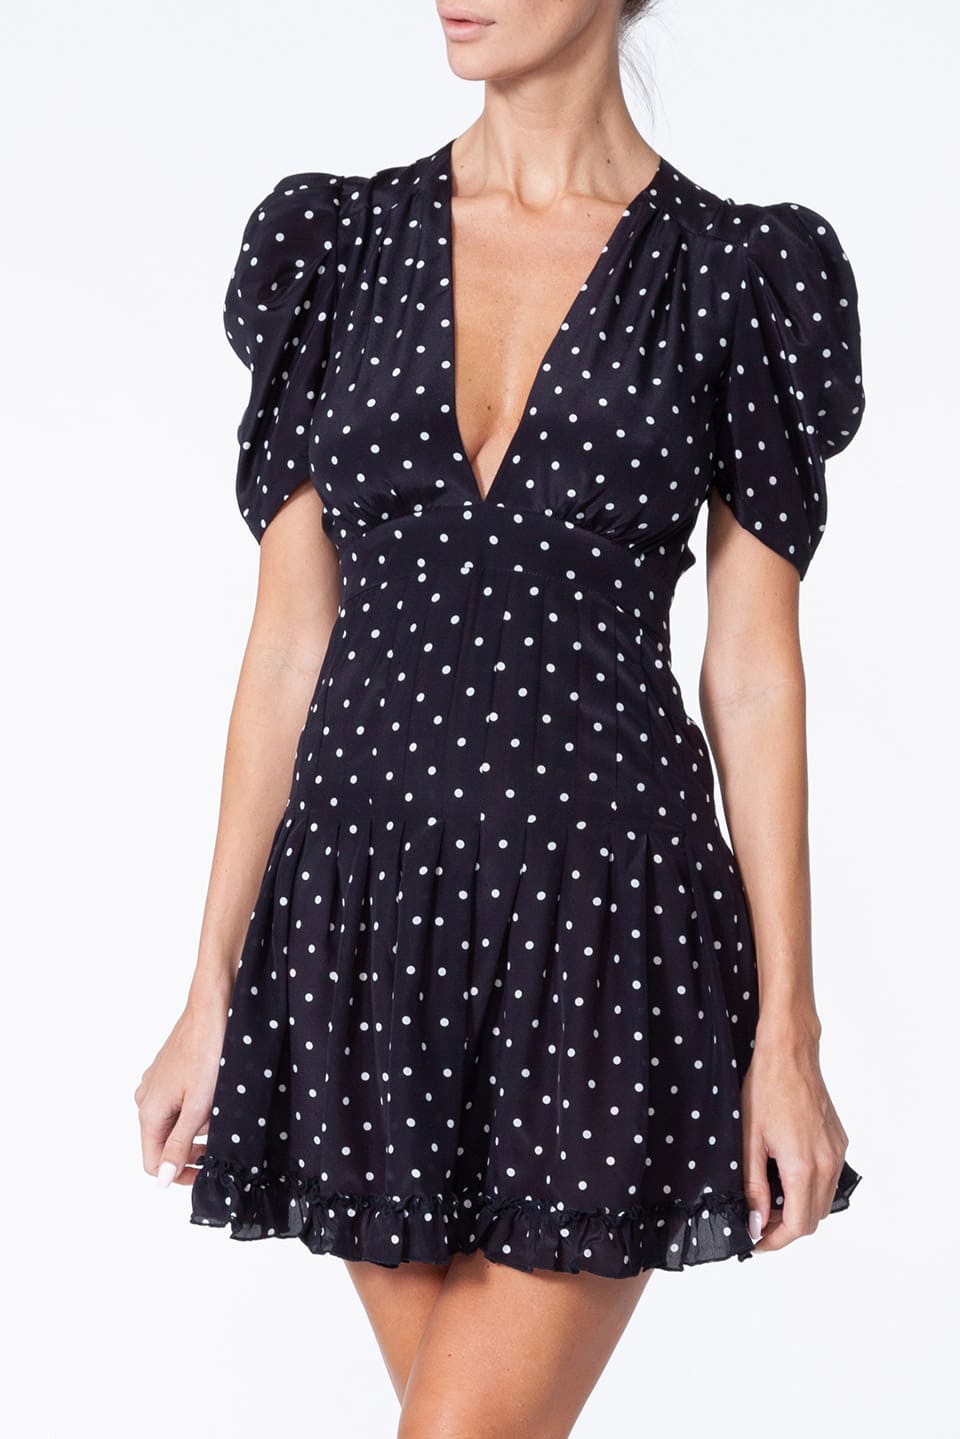 Fashion designer Anze's Black Silk mini dress with polka dots. Zoom on material details